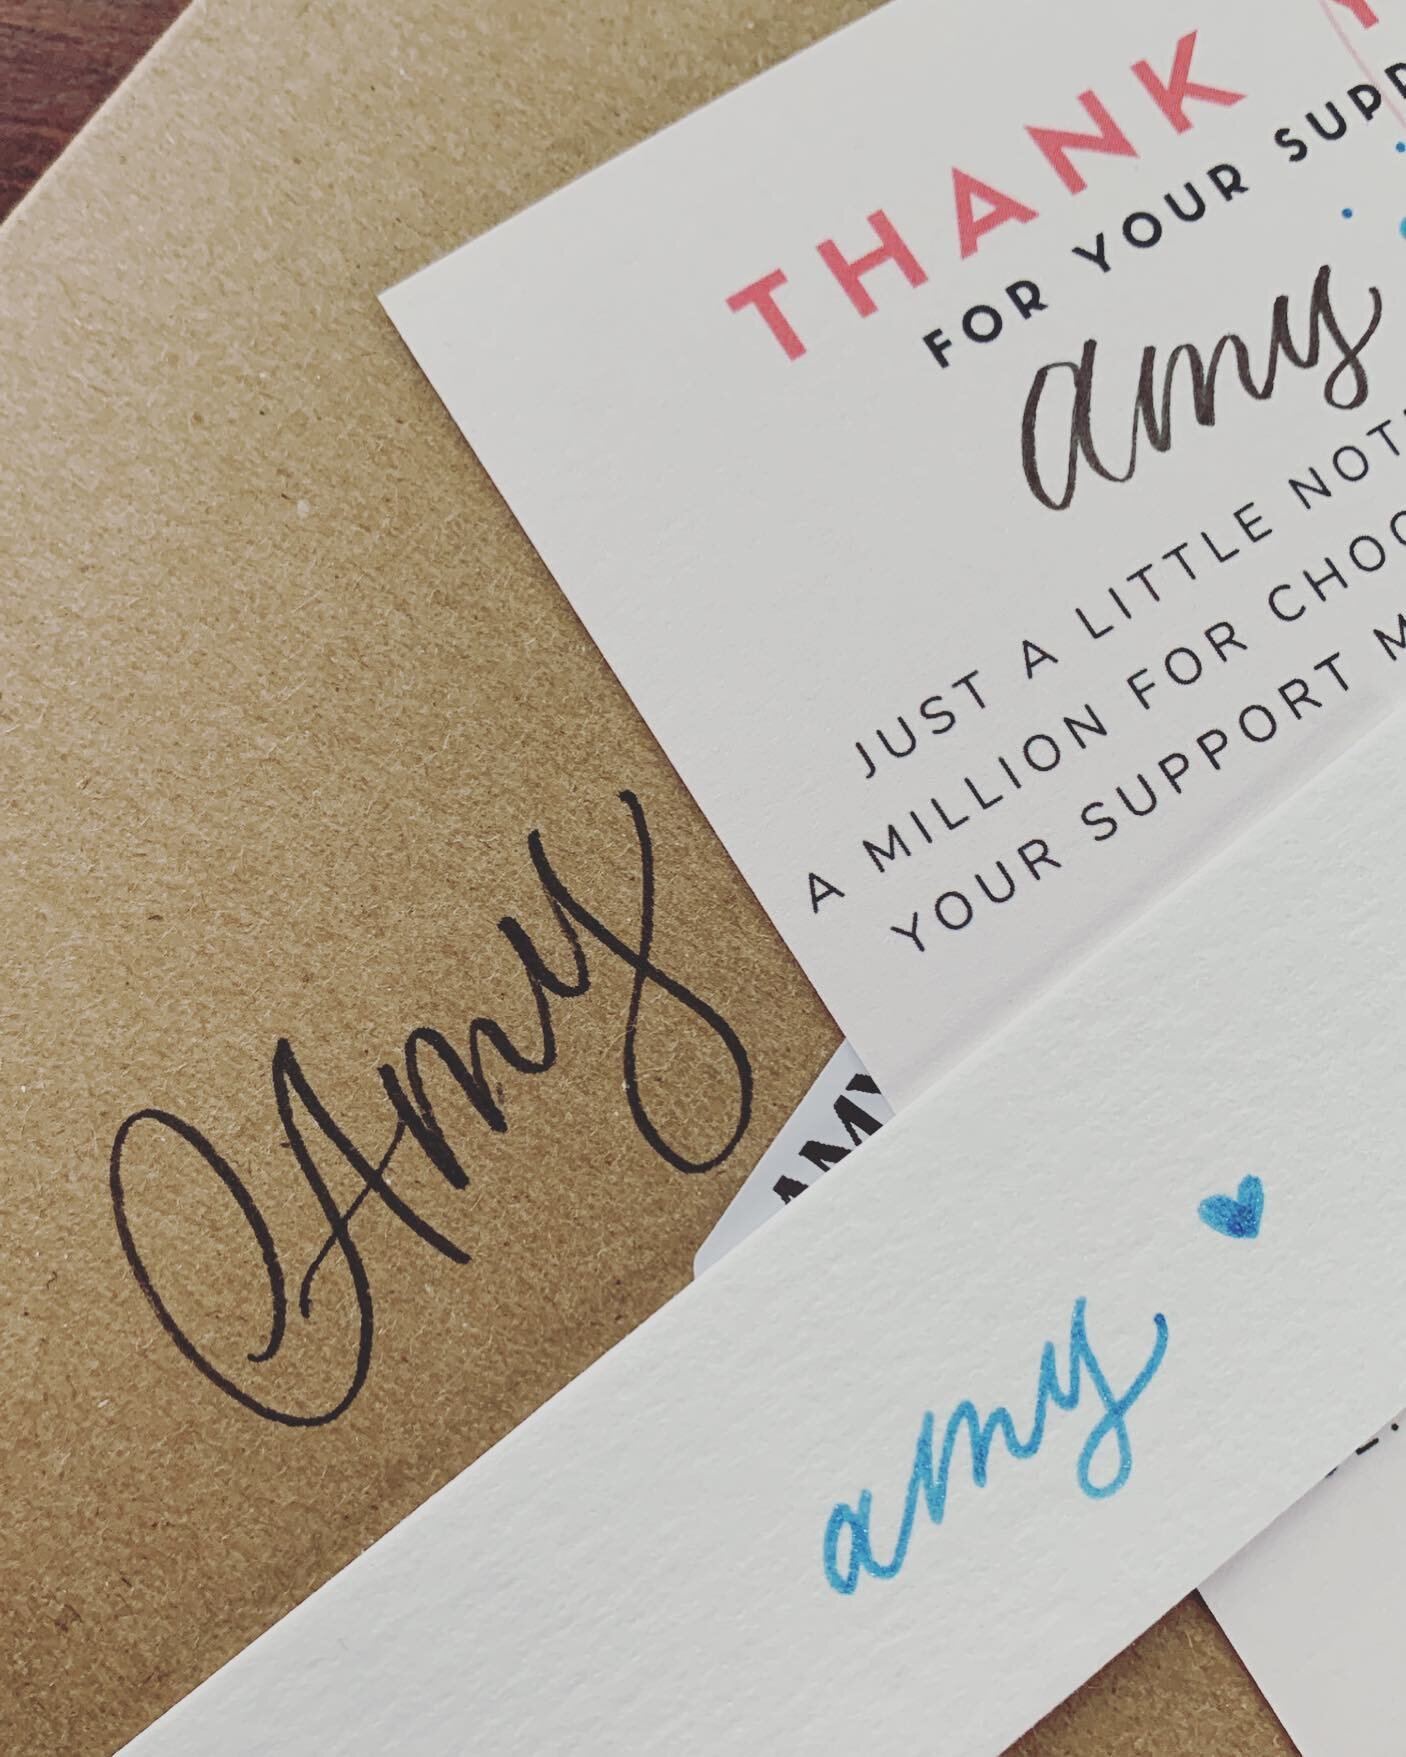 Lettering is such an incredible way to express and practise creativity + some names just come out so beautifully they deserve to be 📸. Here is &lsquo;Amy&rsquo; three ways! 

This package made its way to Montreal 🥰